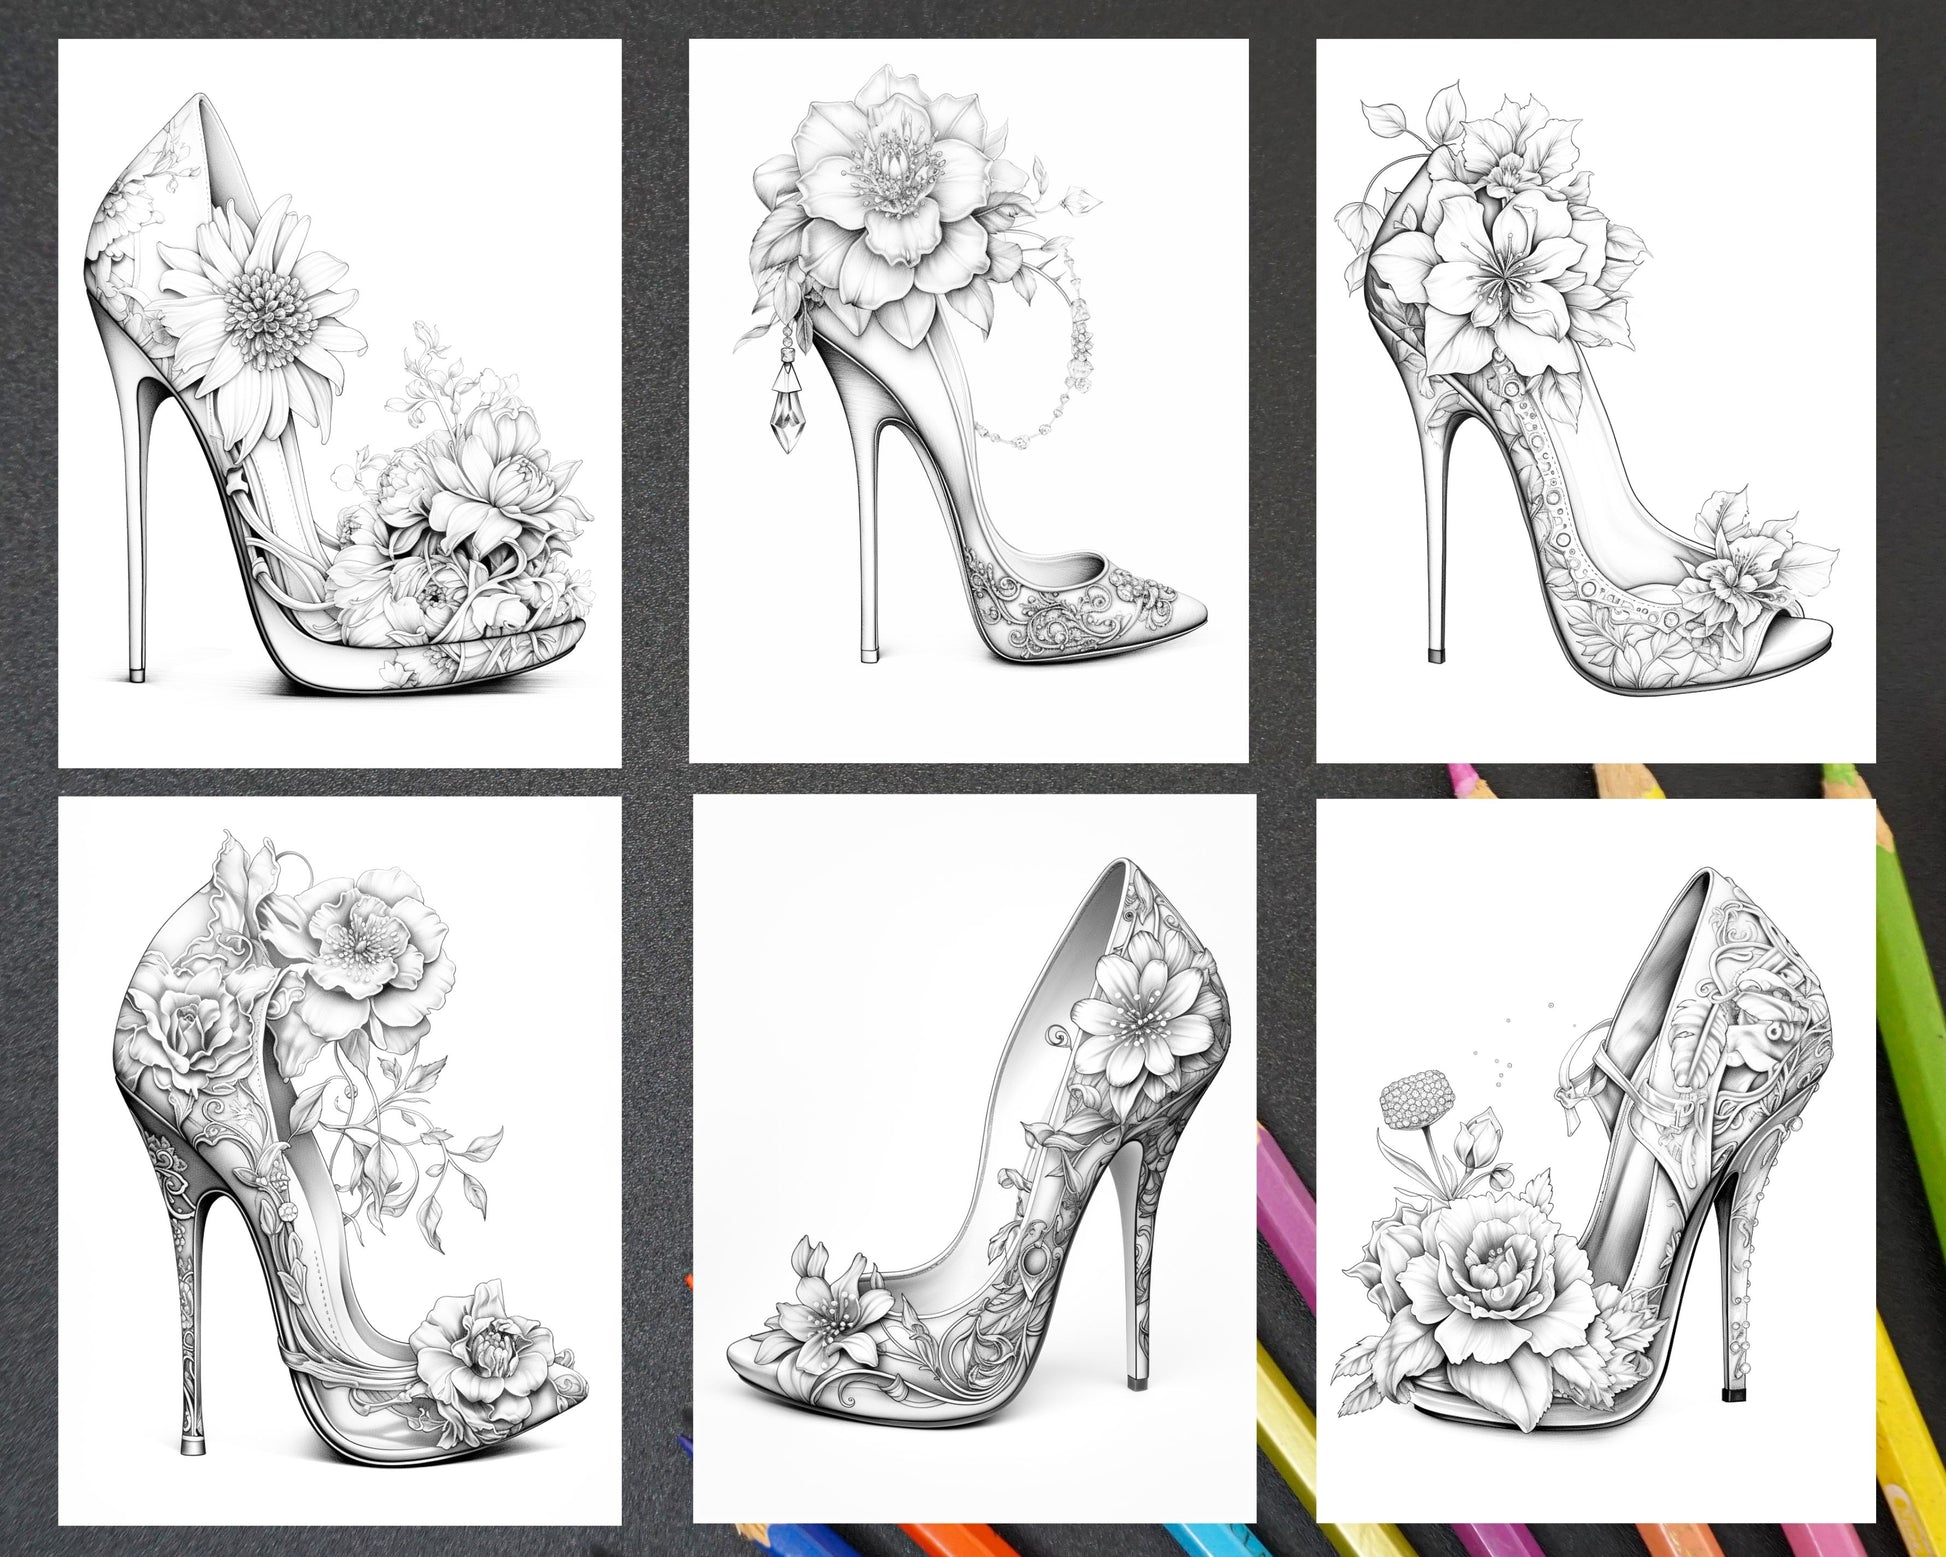 Flower wedding shoes grayscale coloring pages printable for adults â coloring